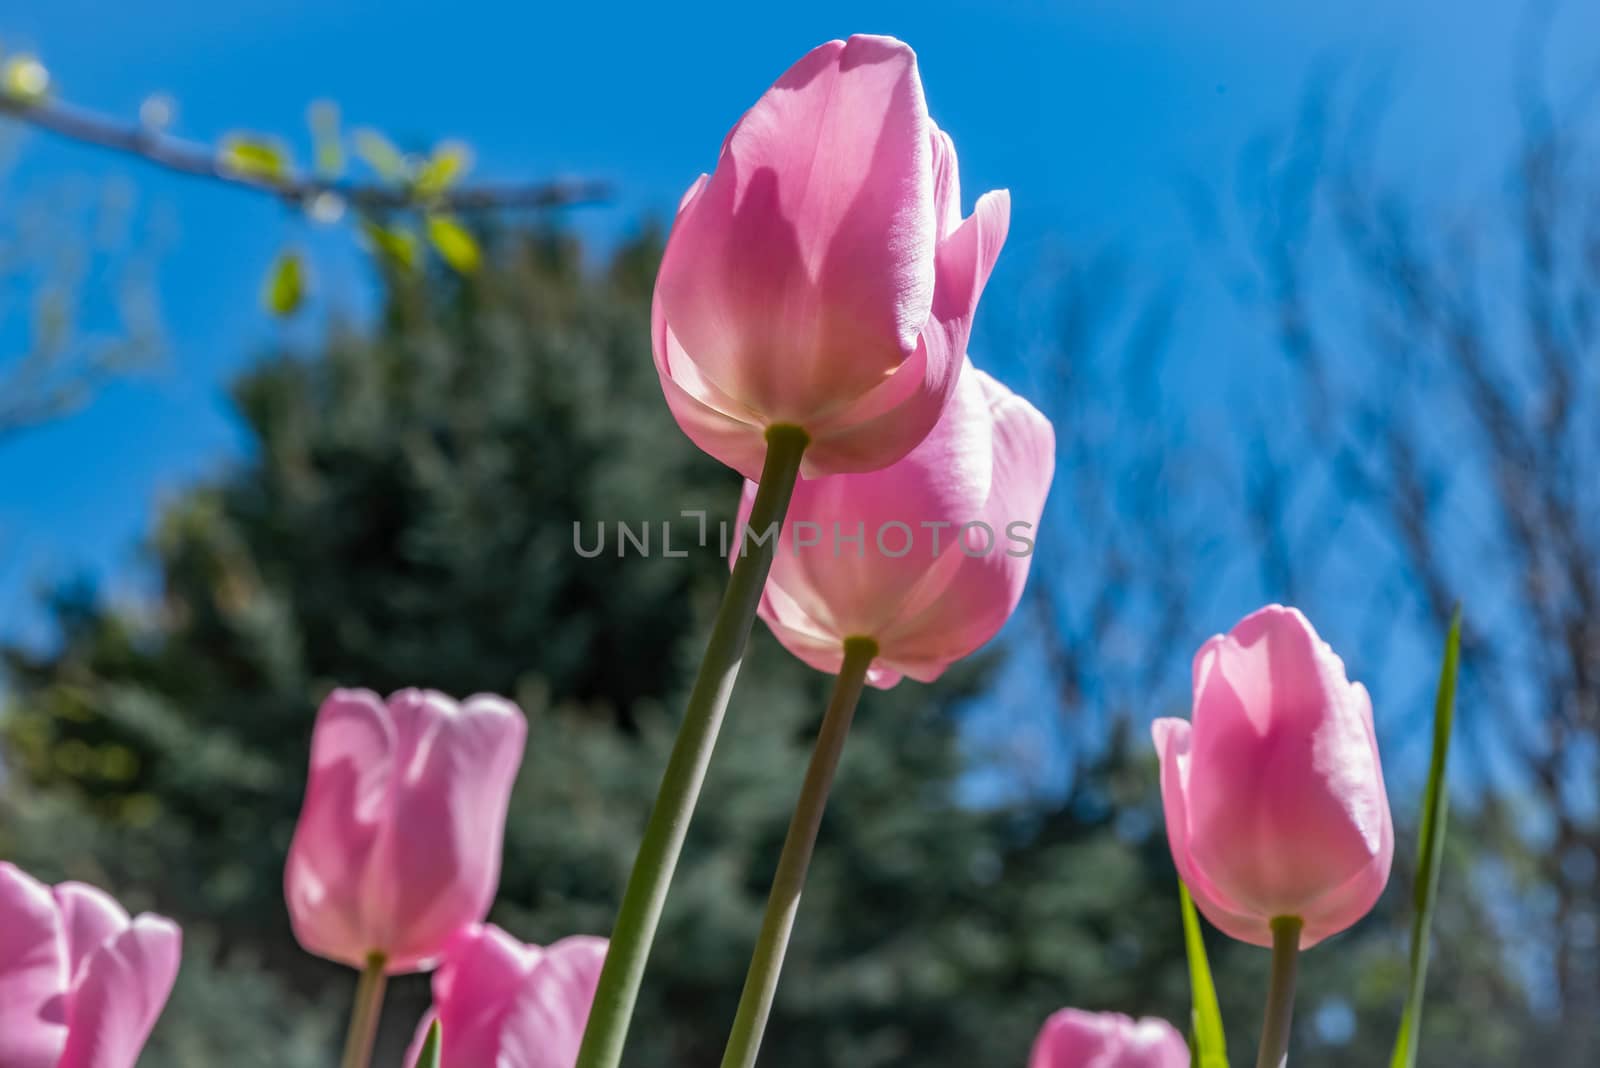 Close-up of Pink Tulips growing in a garden.